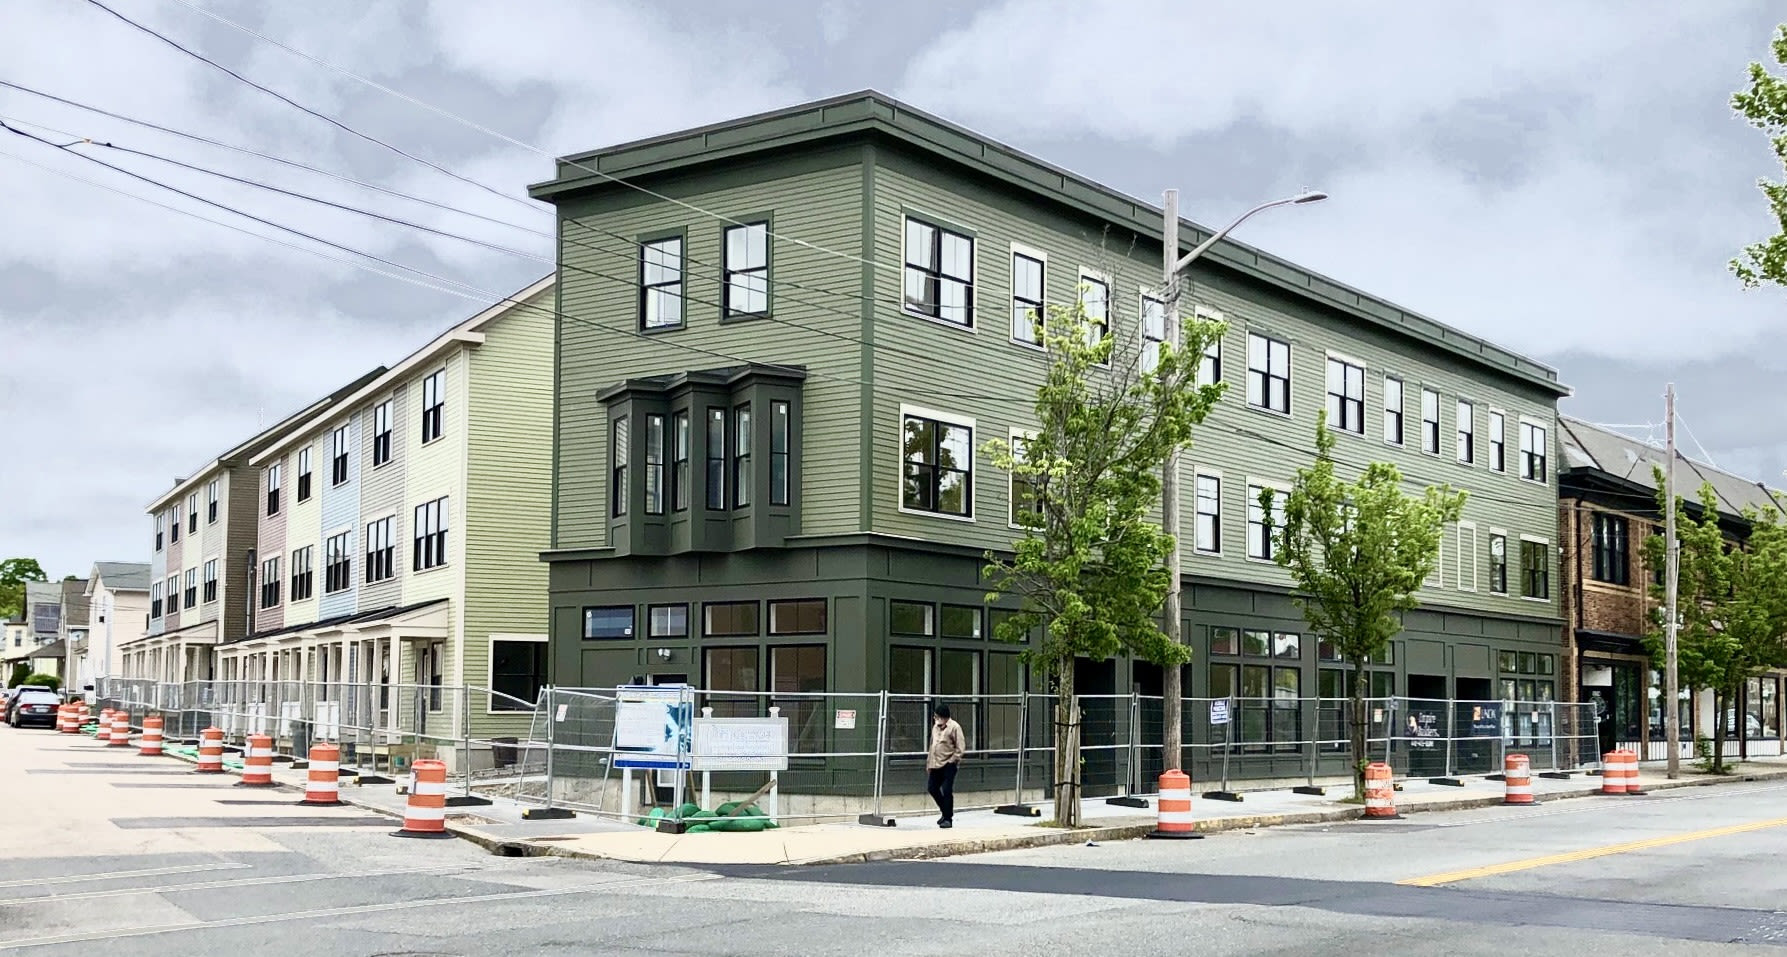 GoLocalProv | Business | East Providence Does Affordable Housing Right – Architecture Critic Will Morgan